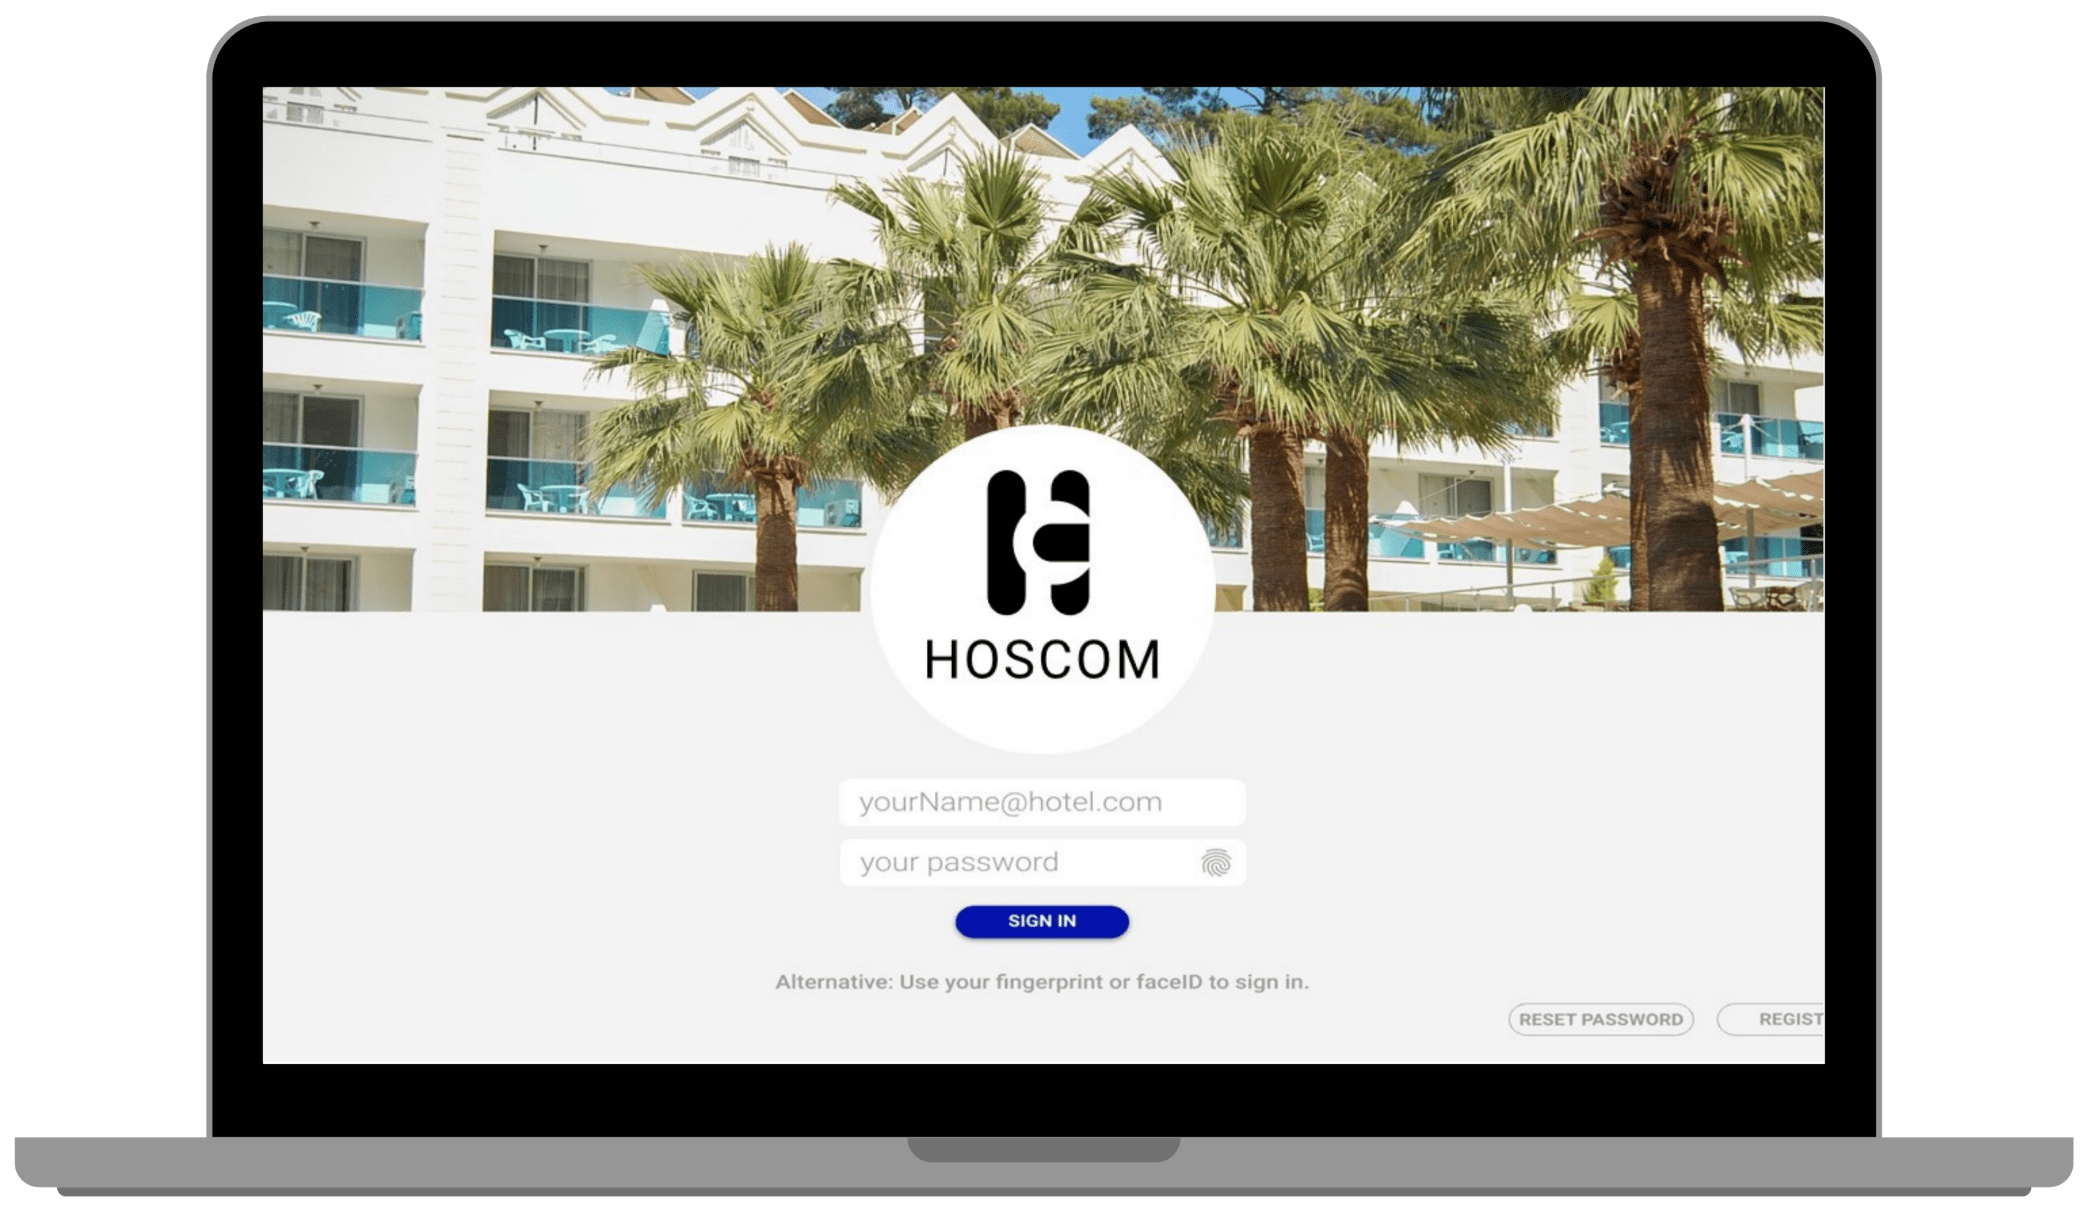 Get to know your new <br> communication platform for your hotel!